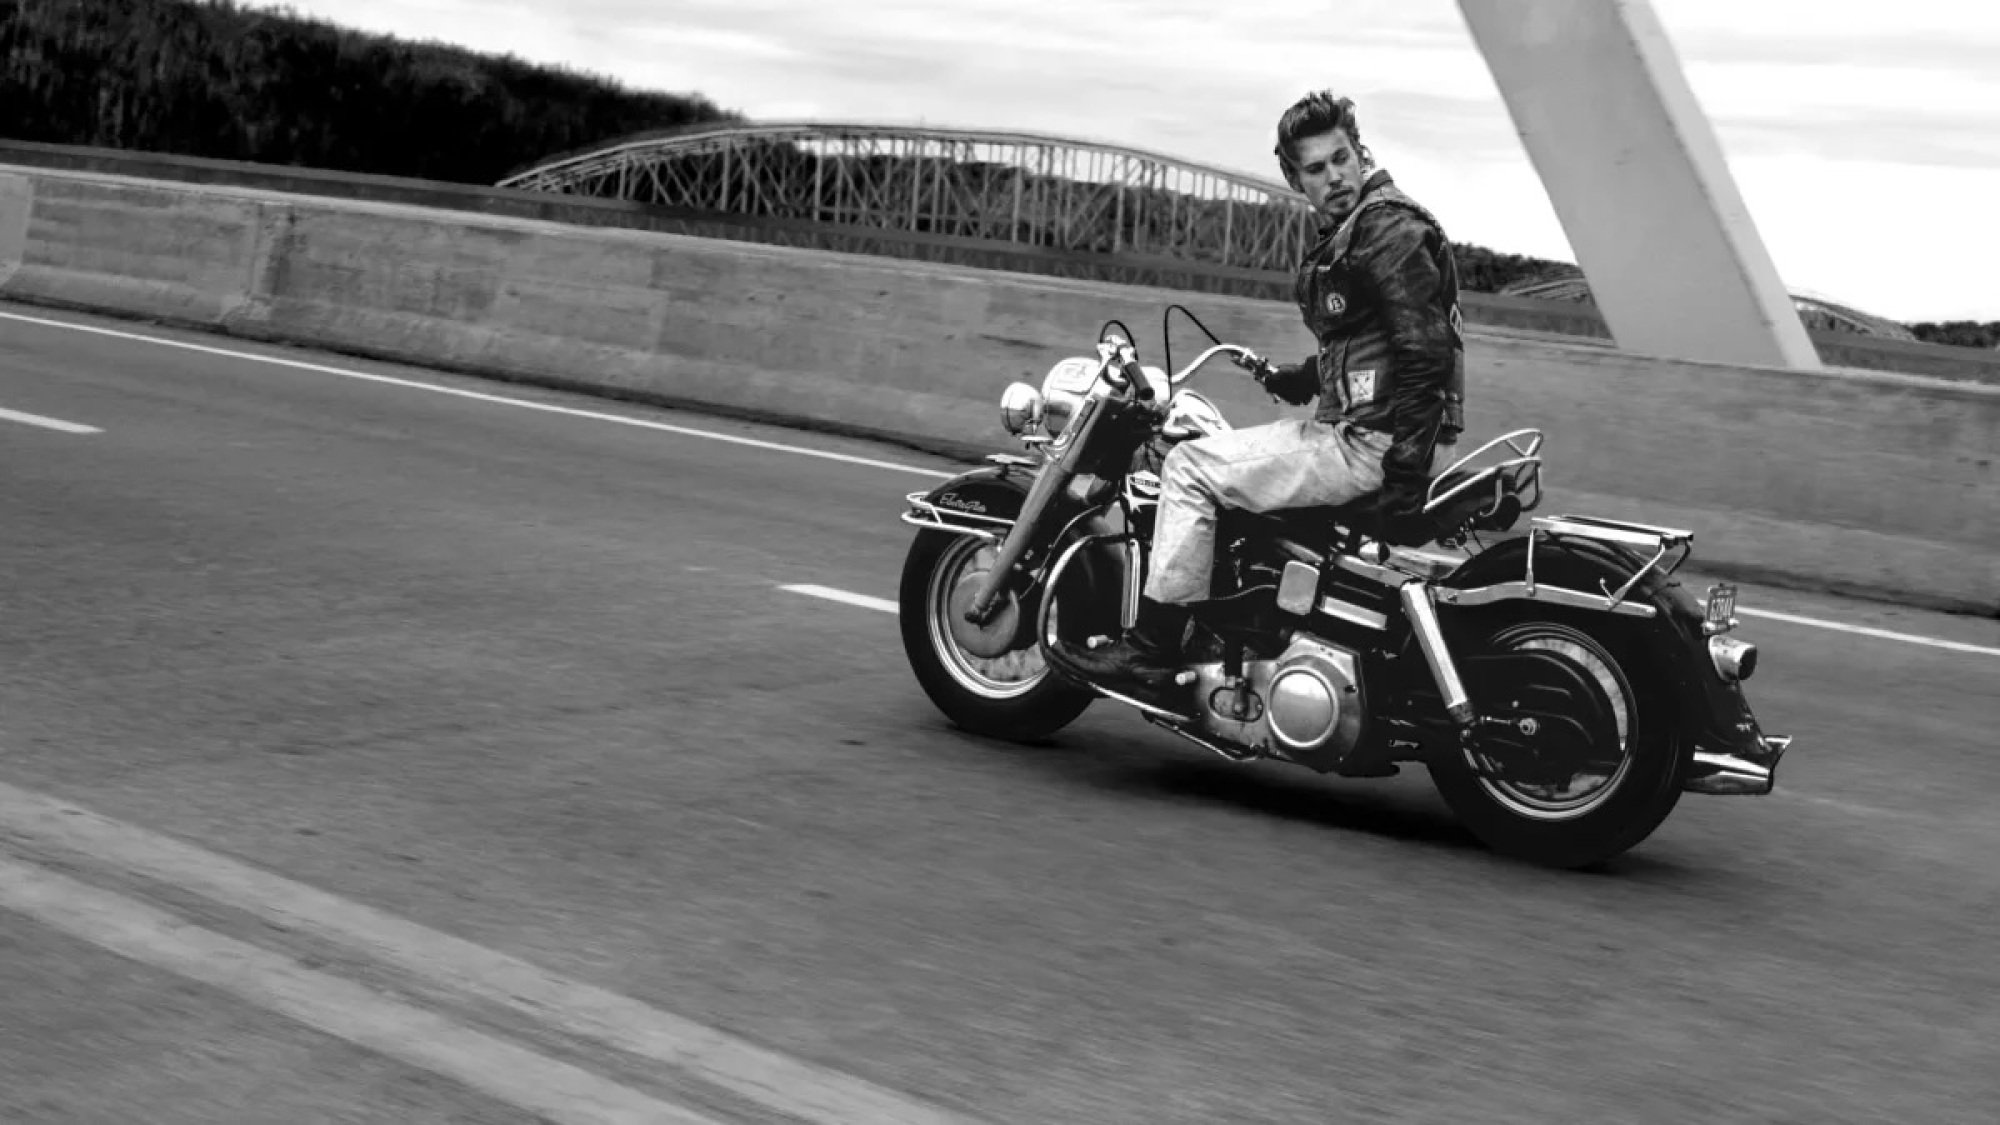 A man in a leather jacket rides a motorcycle across a bridge.